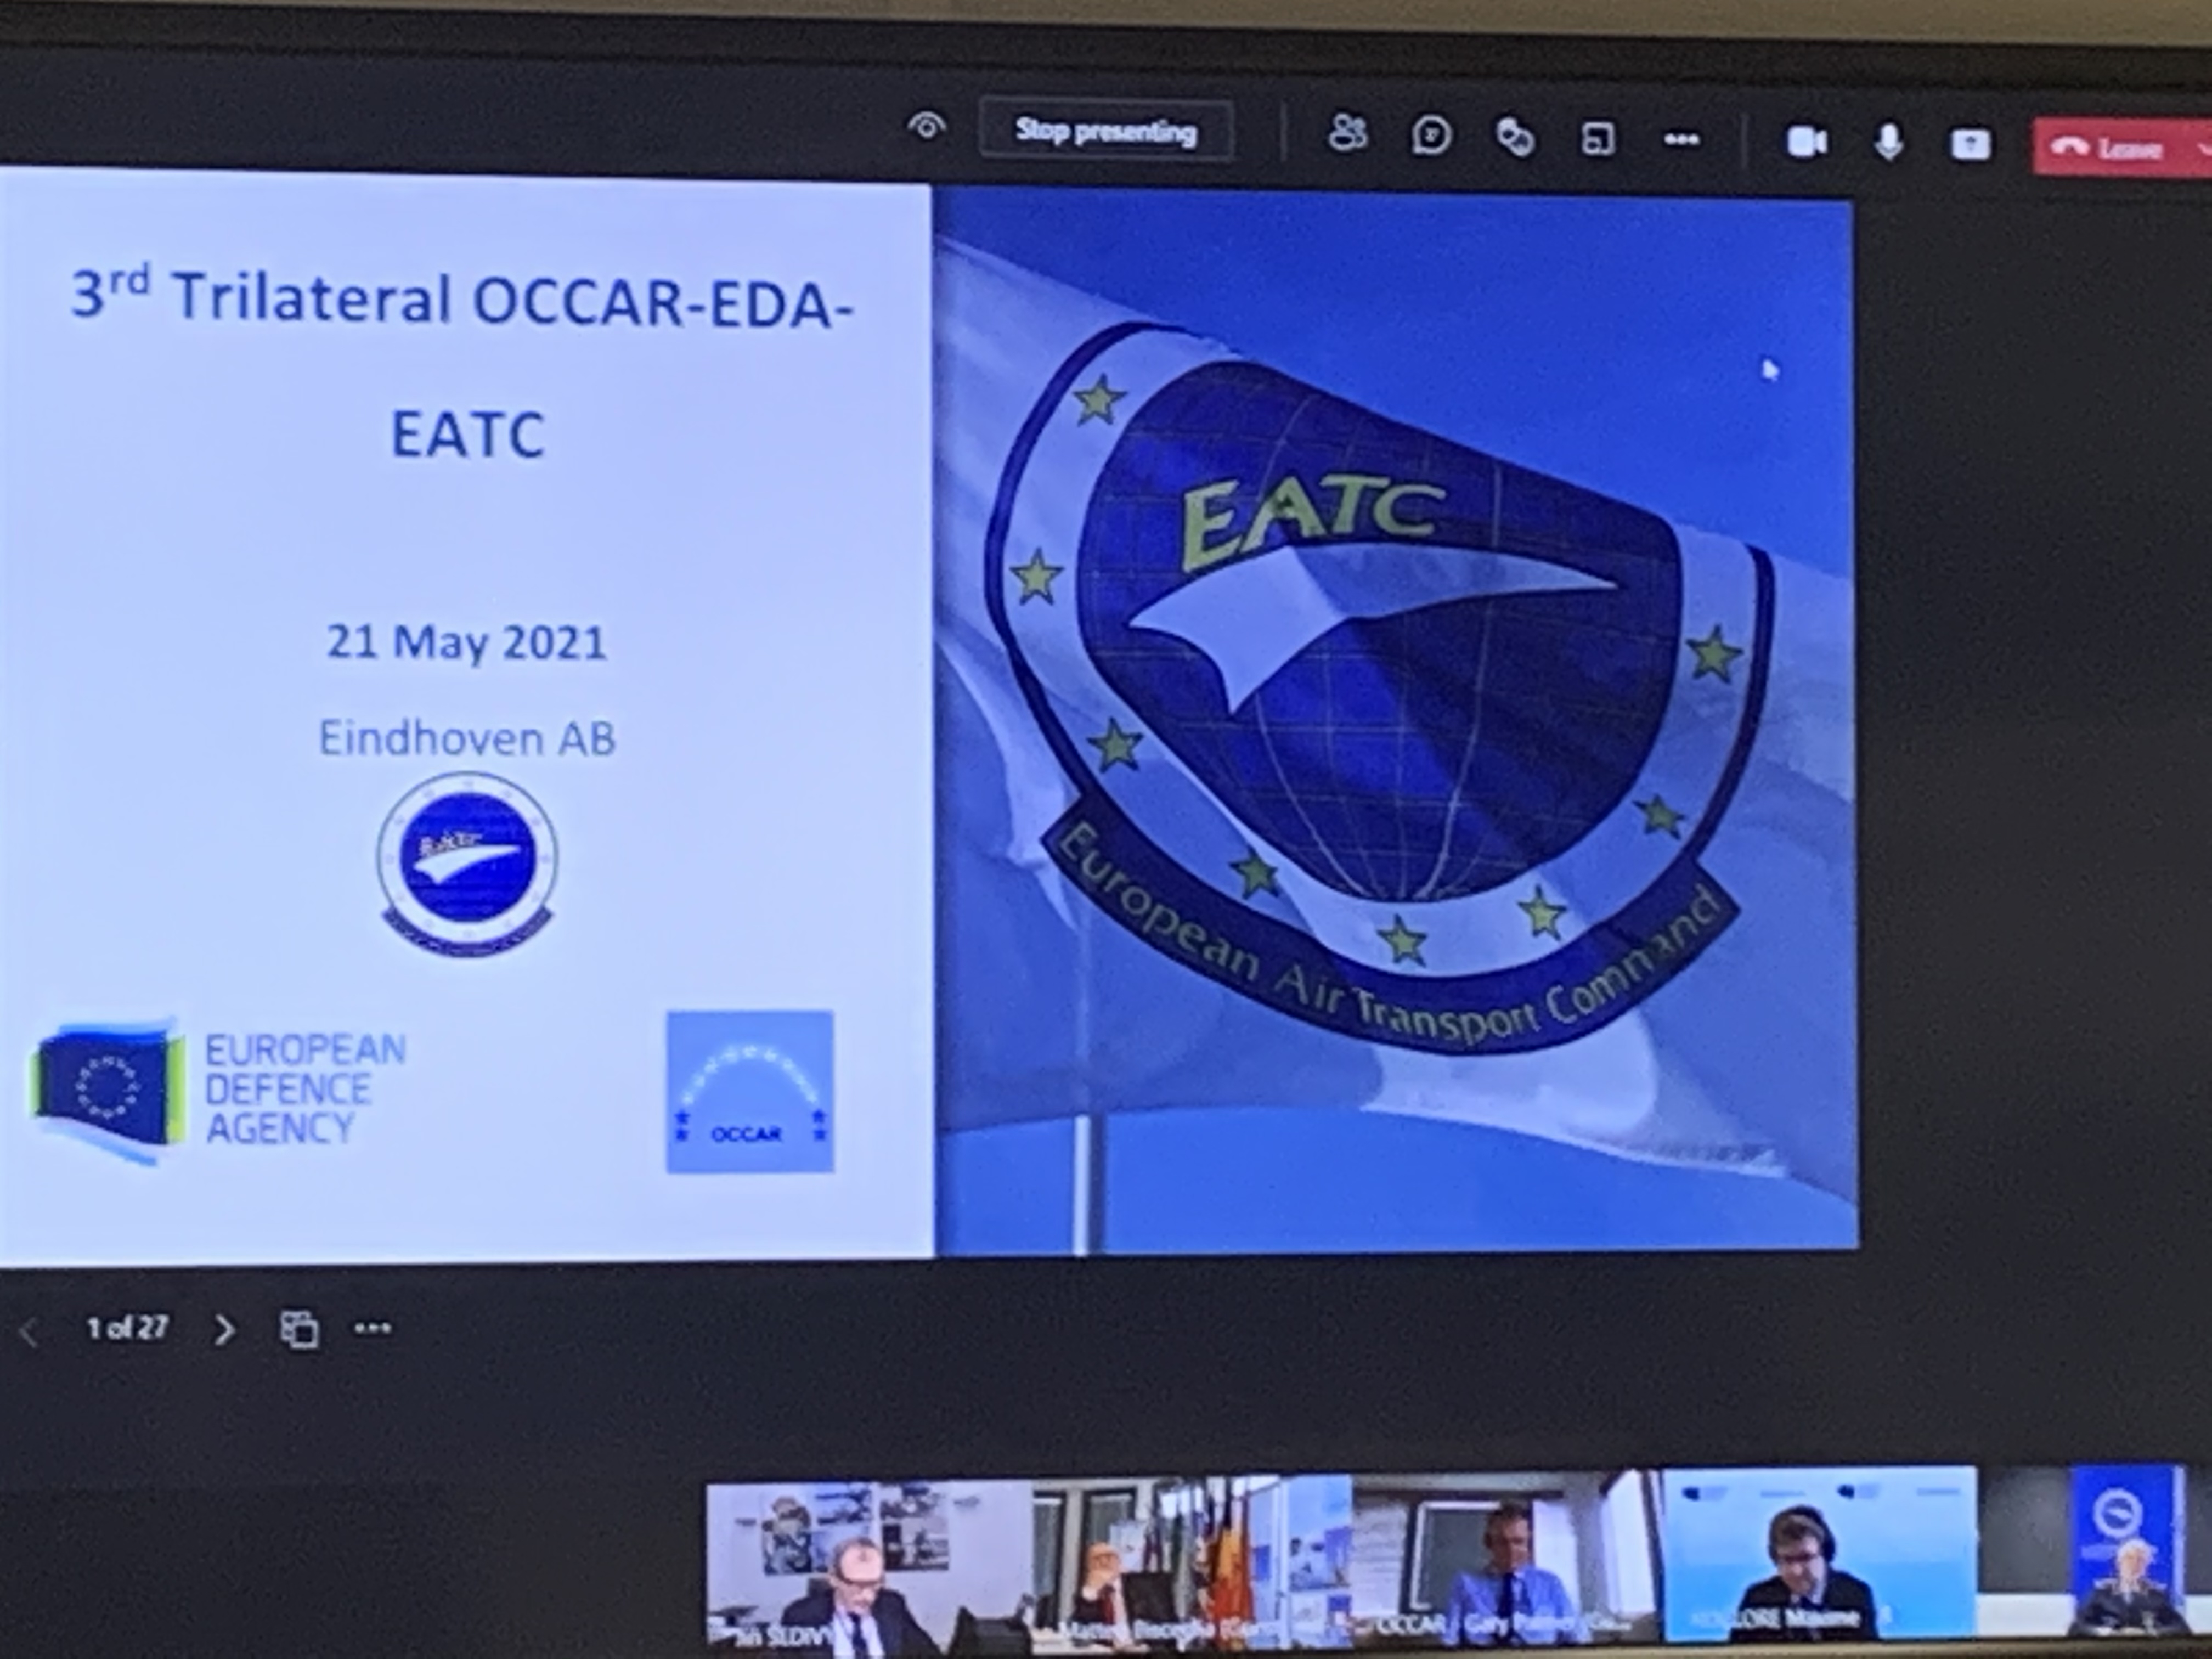 EATC, EDA and OCCAR-EA trilateral A400M cooperation